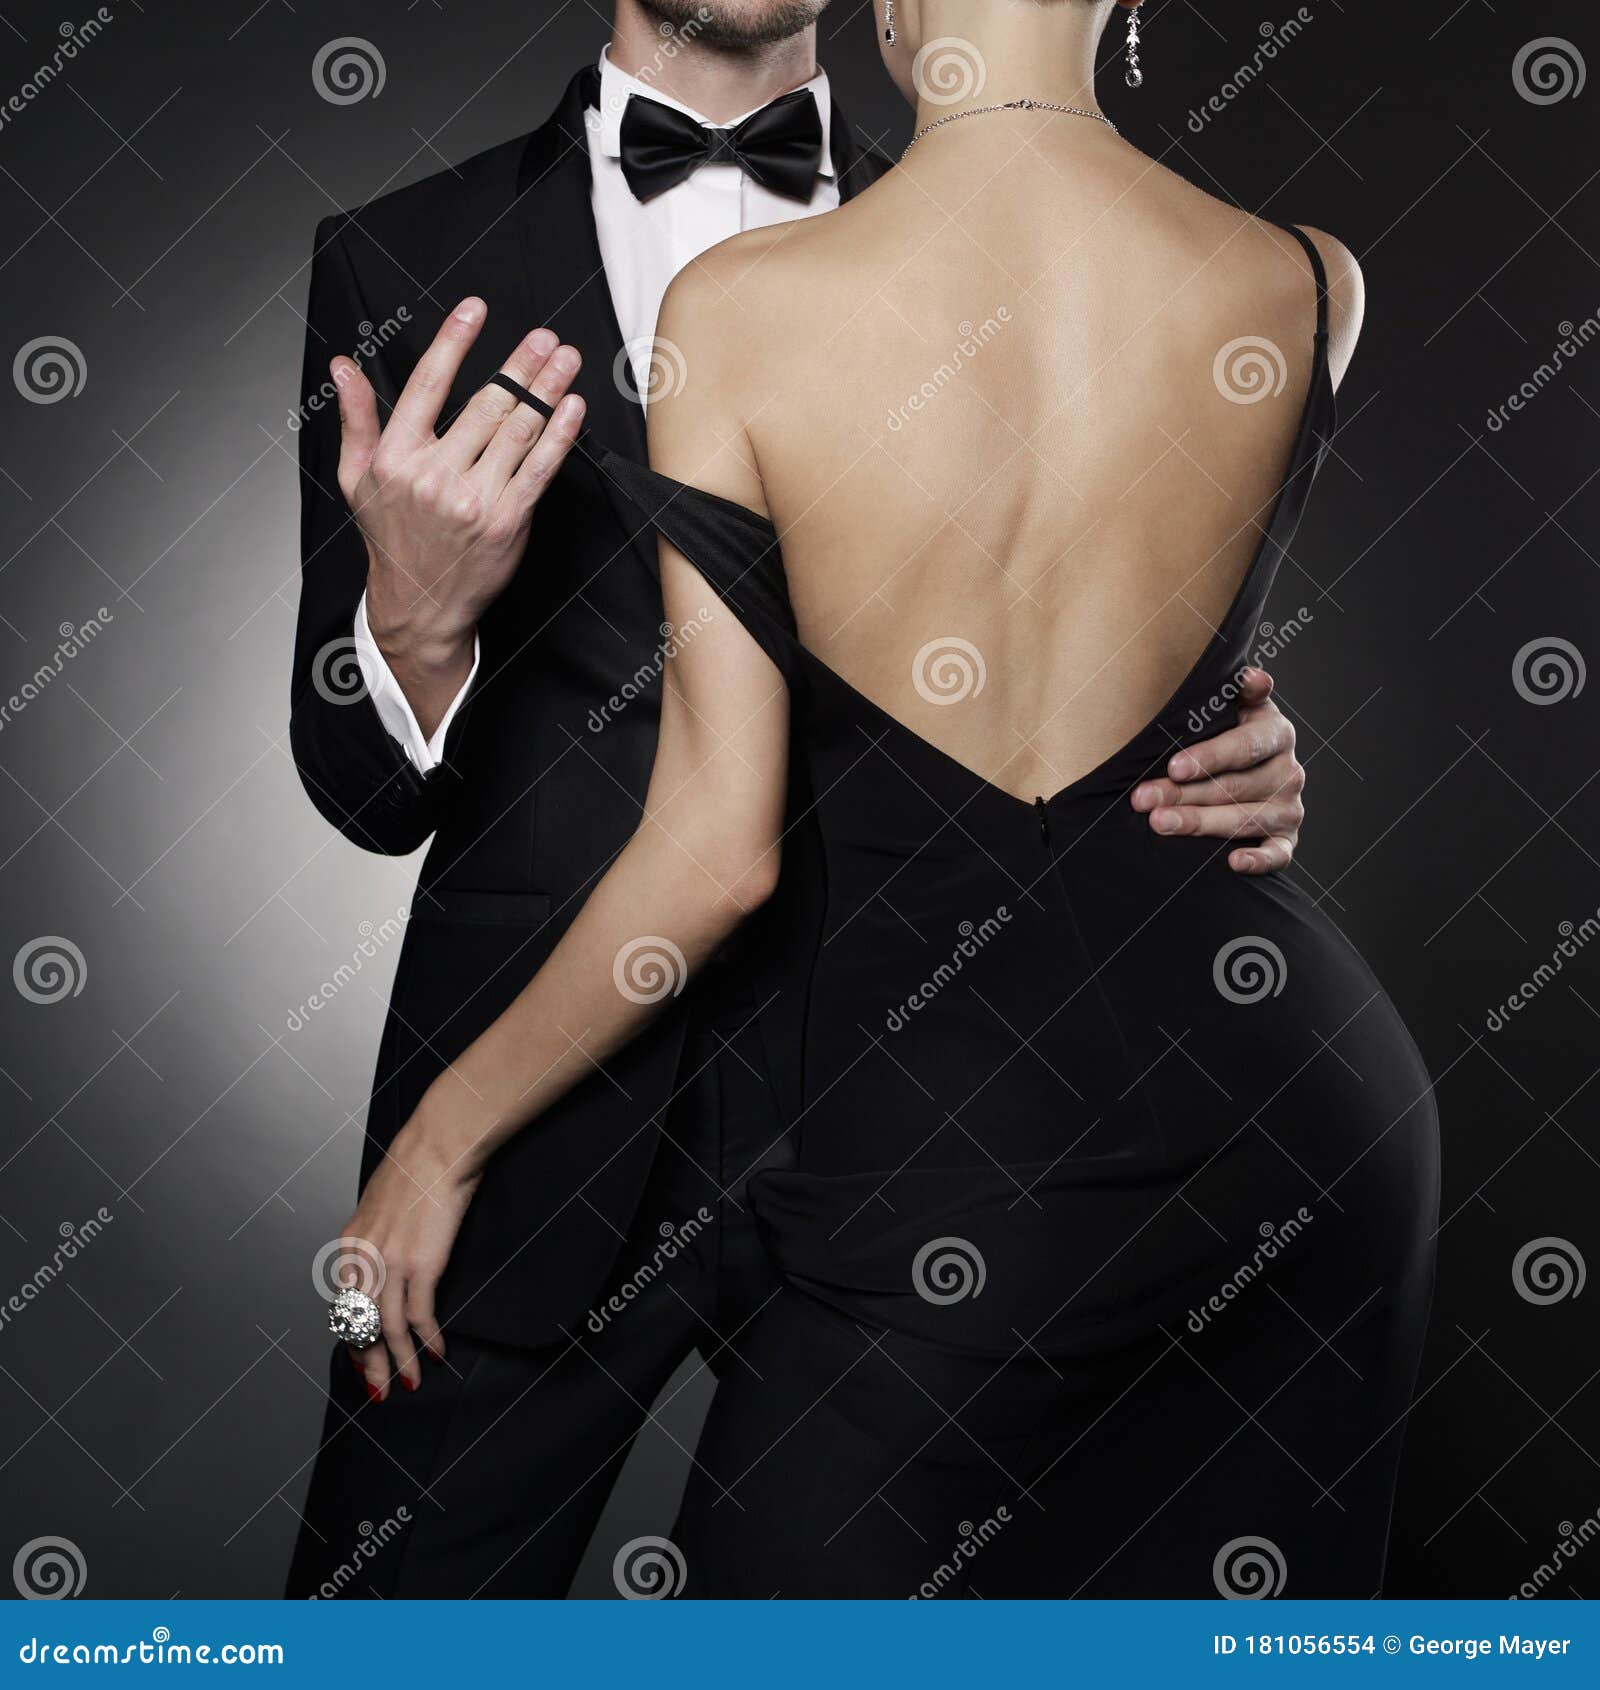 conceptual photo of sexy elegant couple in the evening suit and dress